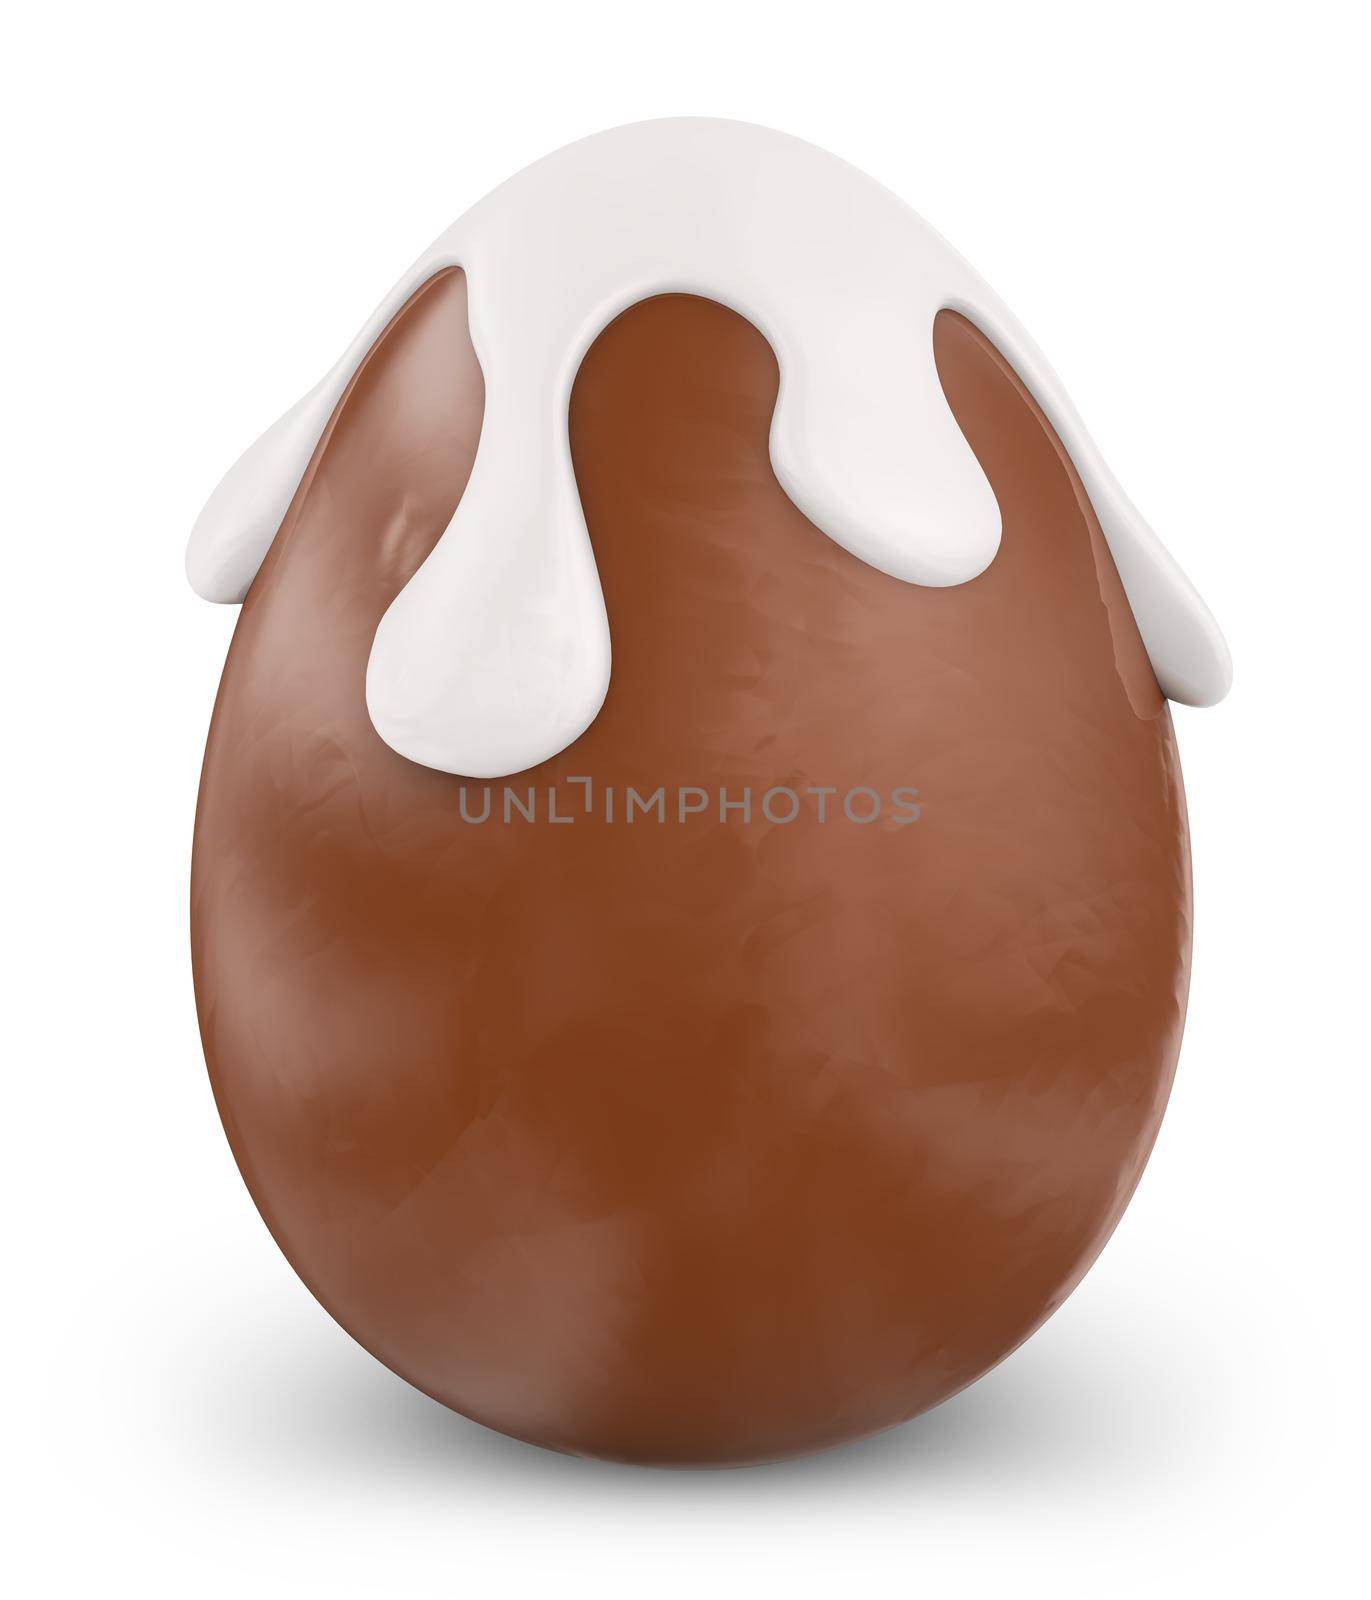 The chocolate eggson a white background. 3d rendering.